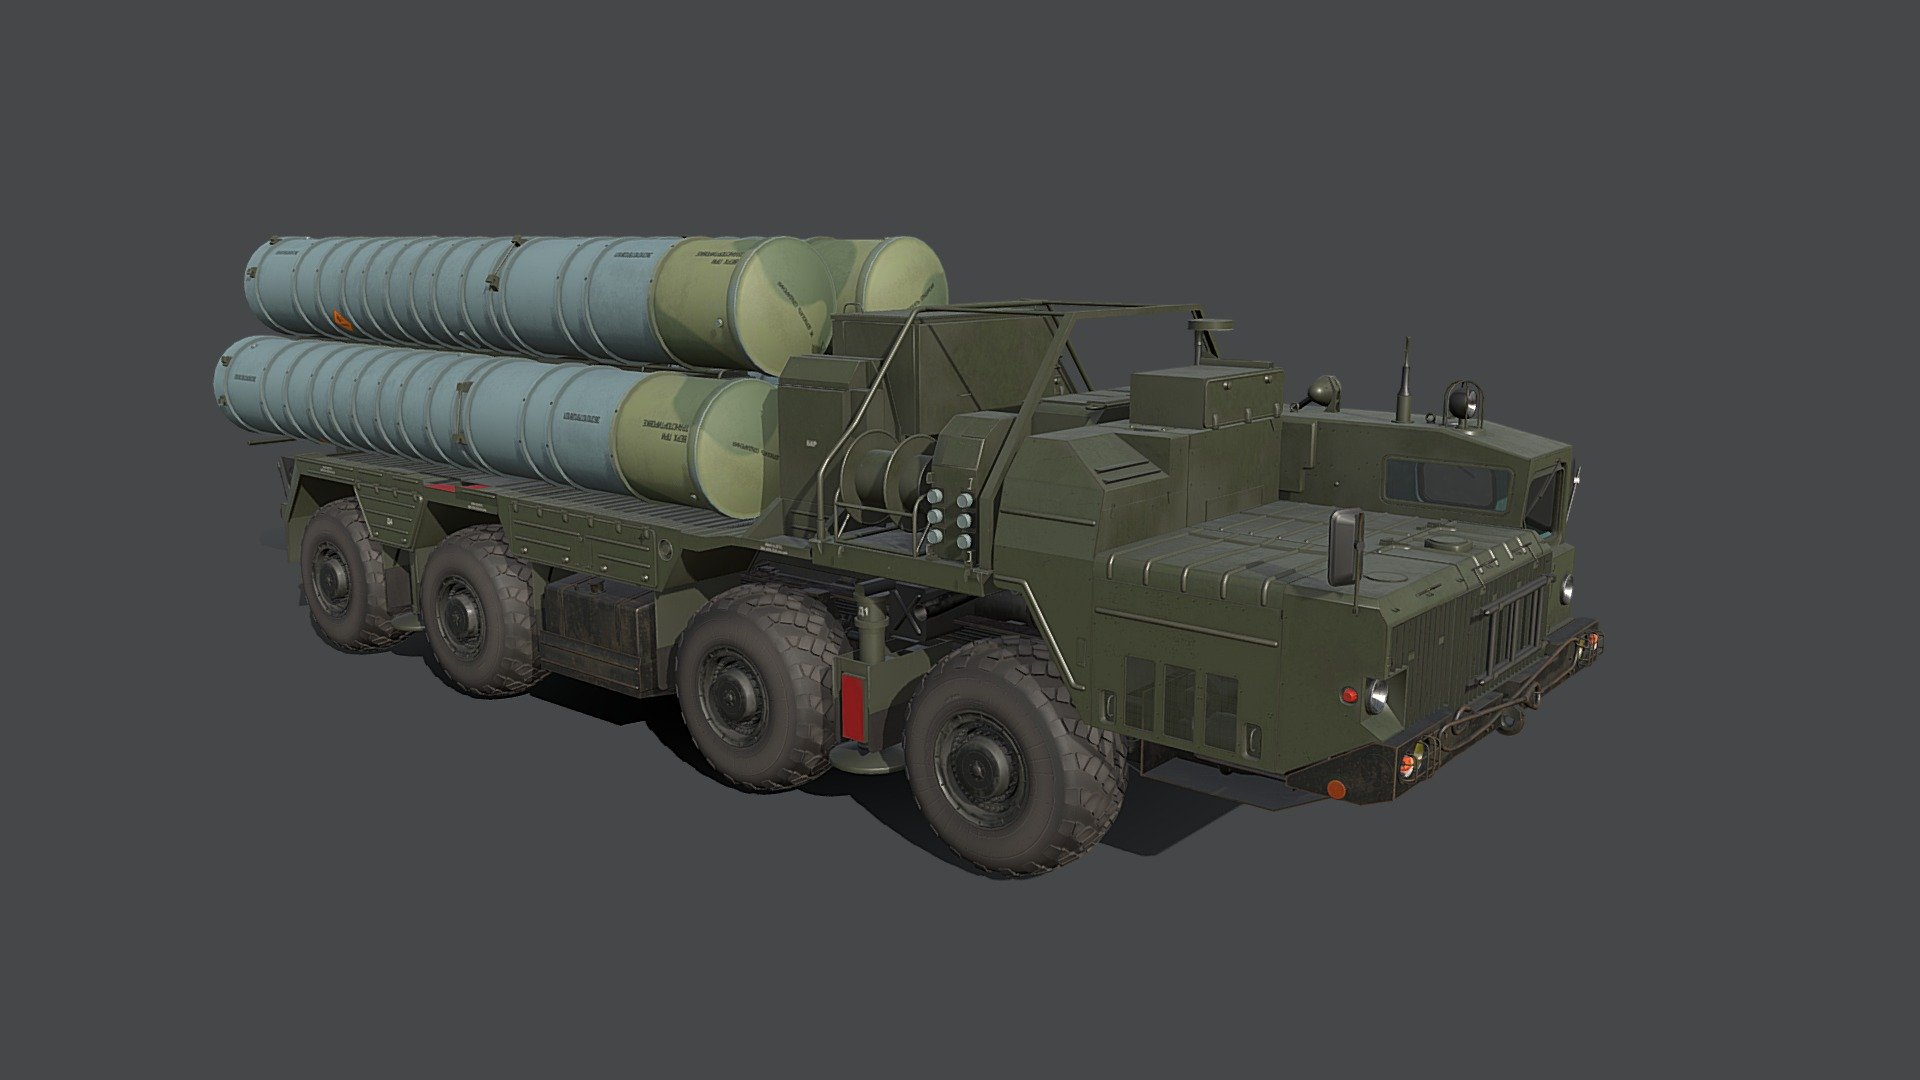 The S-400 Triumf , previously known as the S-300 PMU-3, is a mobile surface-to-air missile (SAM) system developed in the 1990s by Russia's NPO Almaz as an upgrade to the S-300 family of missiles. The S-400 was approved for service on 28 April 2007 and the first battalion of the systems assumed combat duty on 6 August 2007 3d model